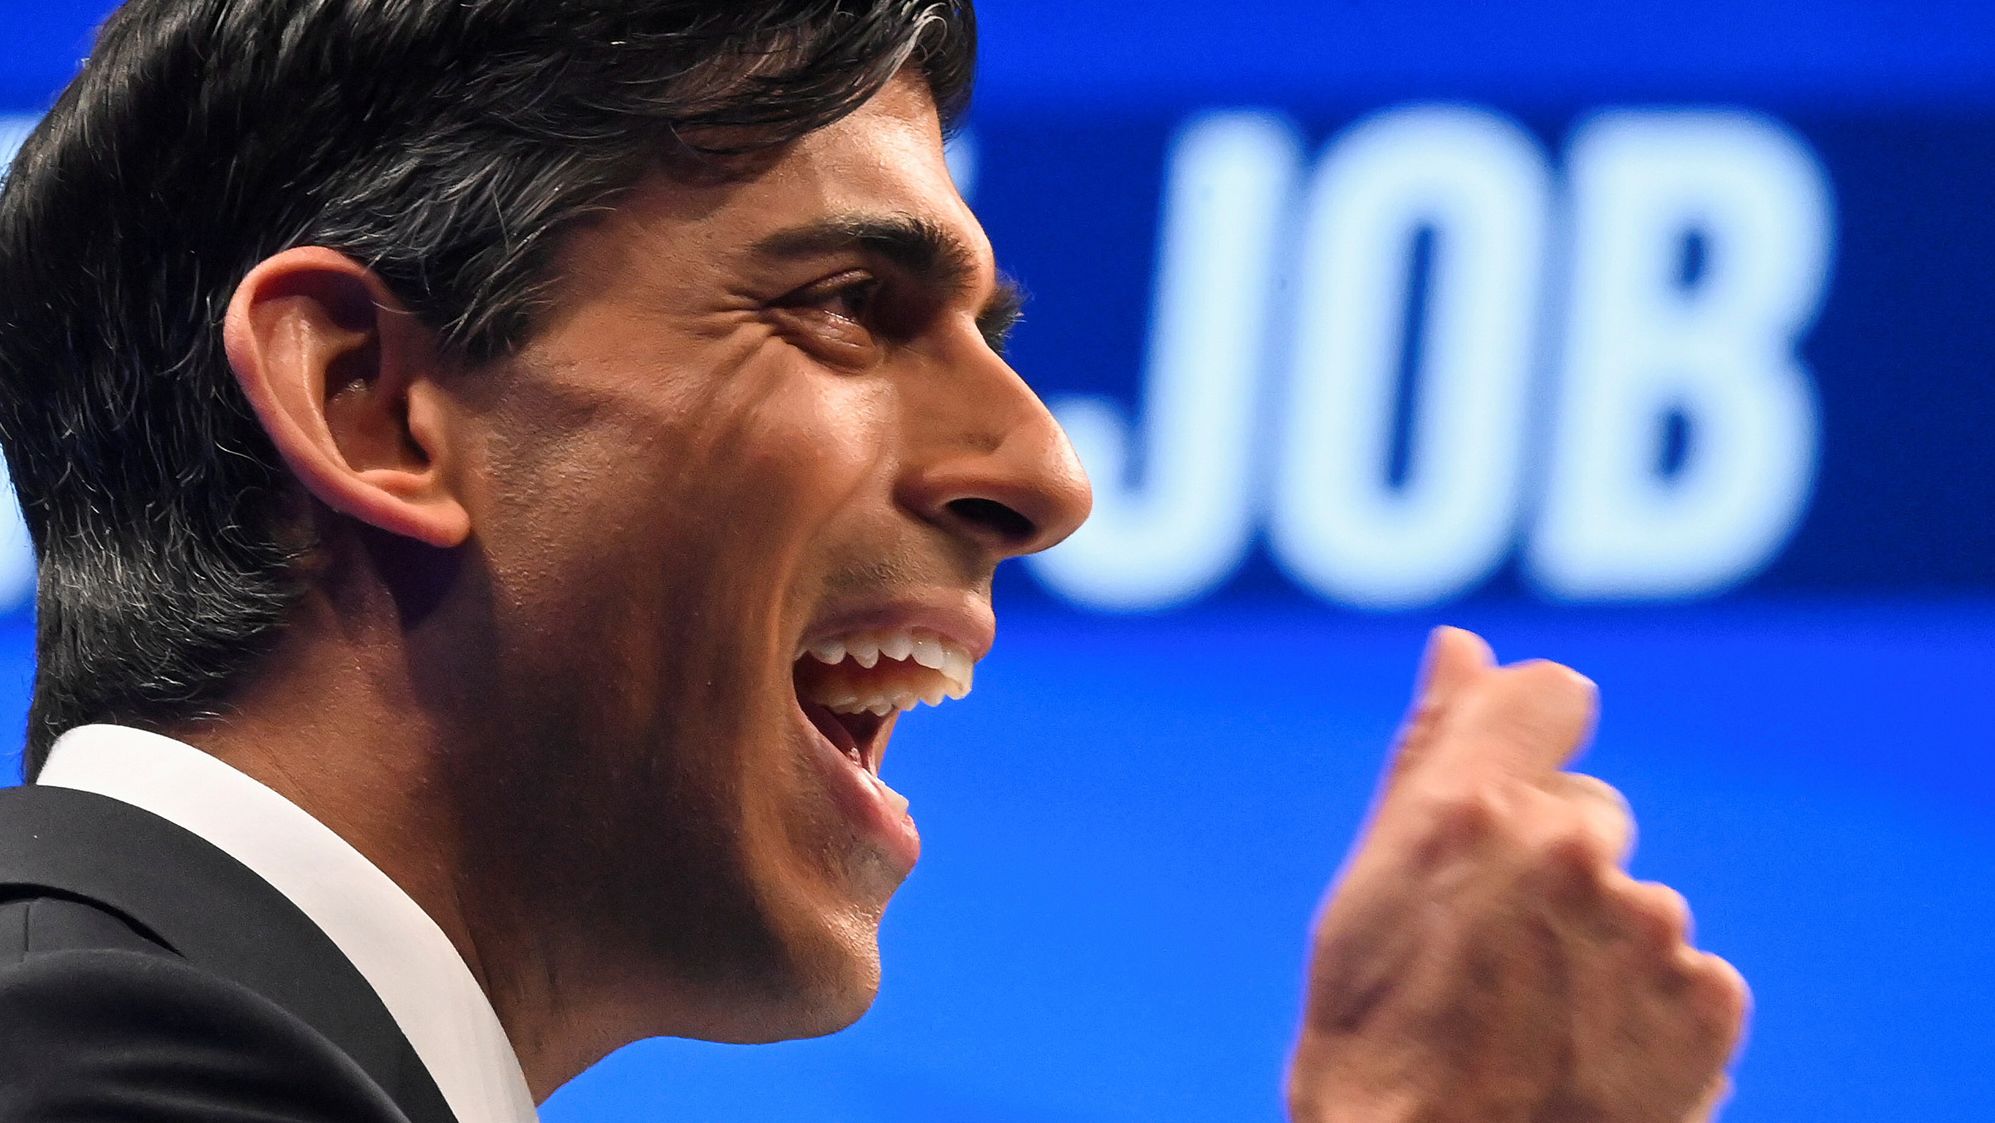 Sunak delivers a speech during the annual Conservative Party Conference in Manchester in October 2021.